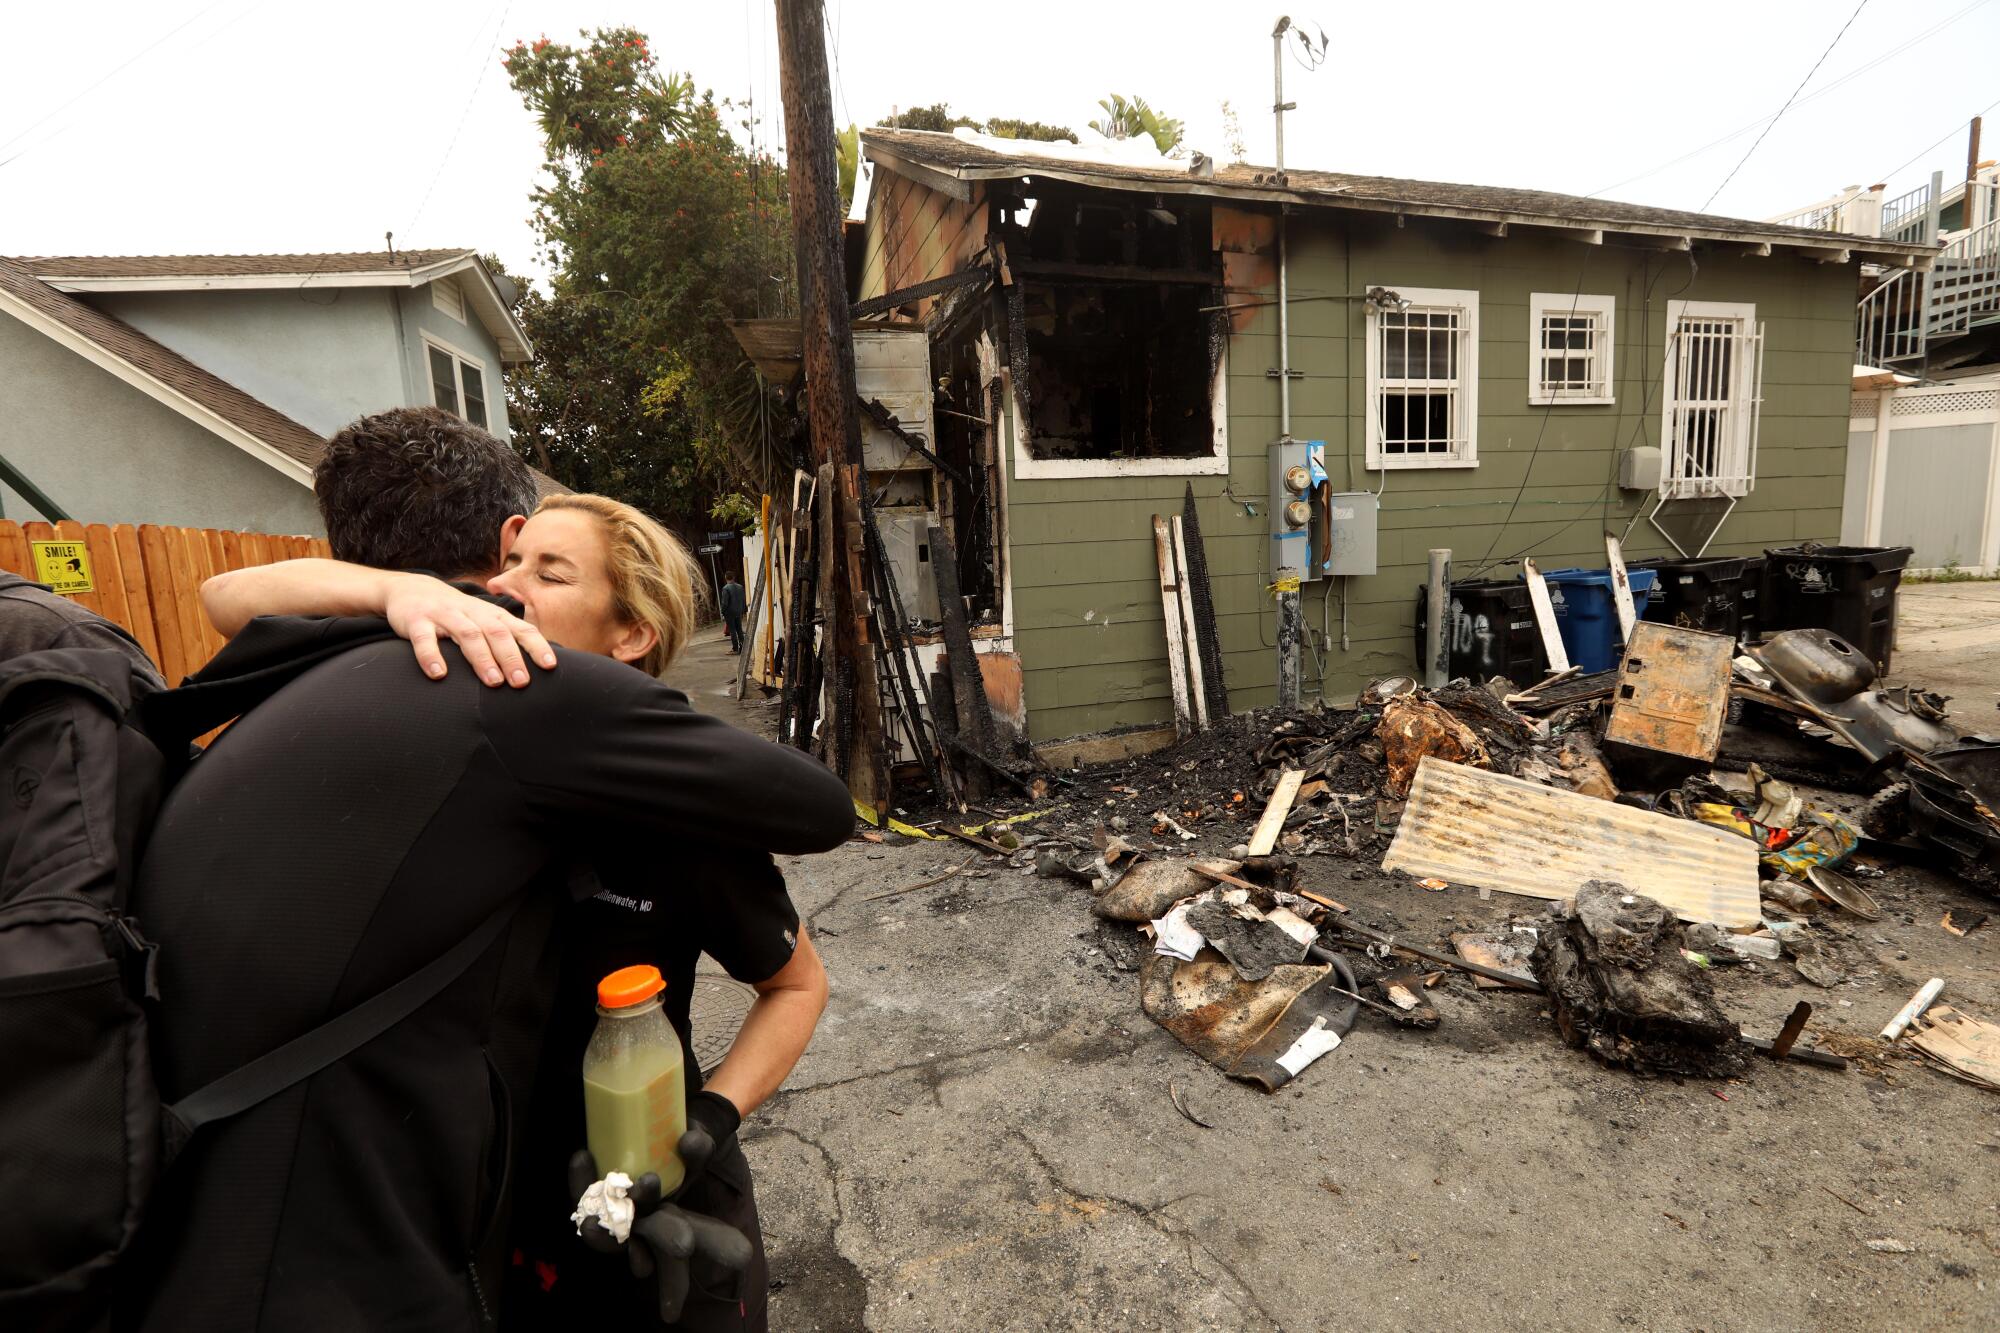 Two people hug outside out of a home with fire damage and debris